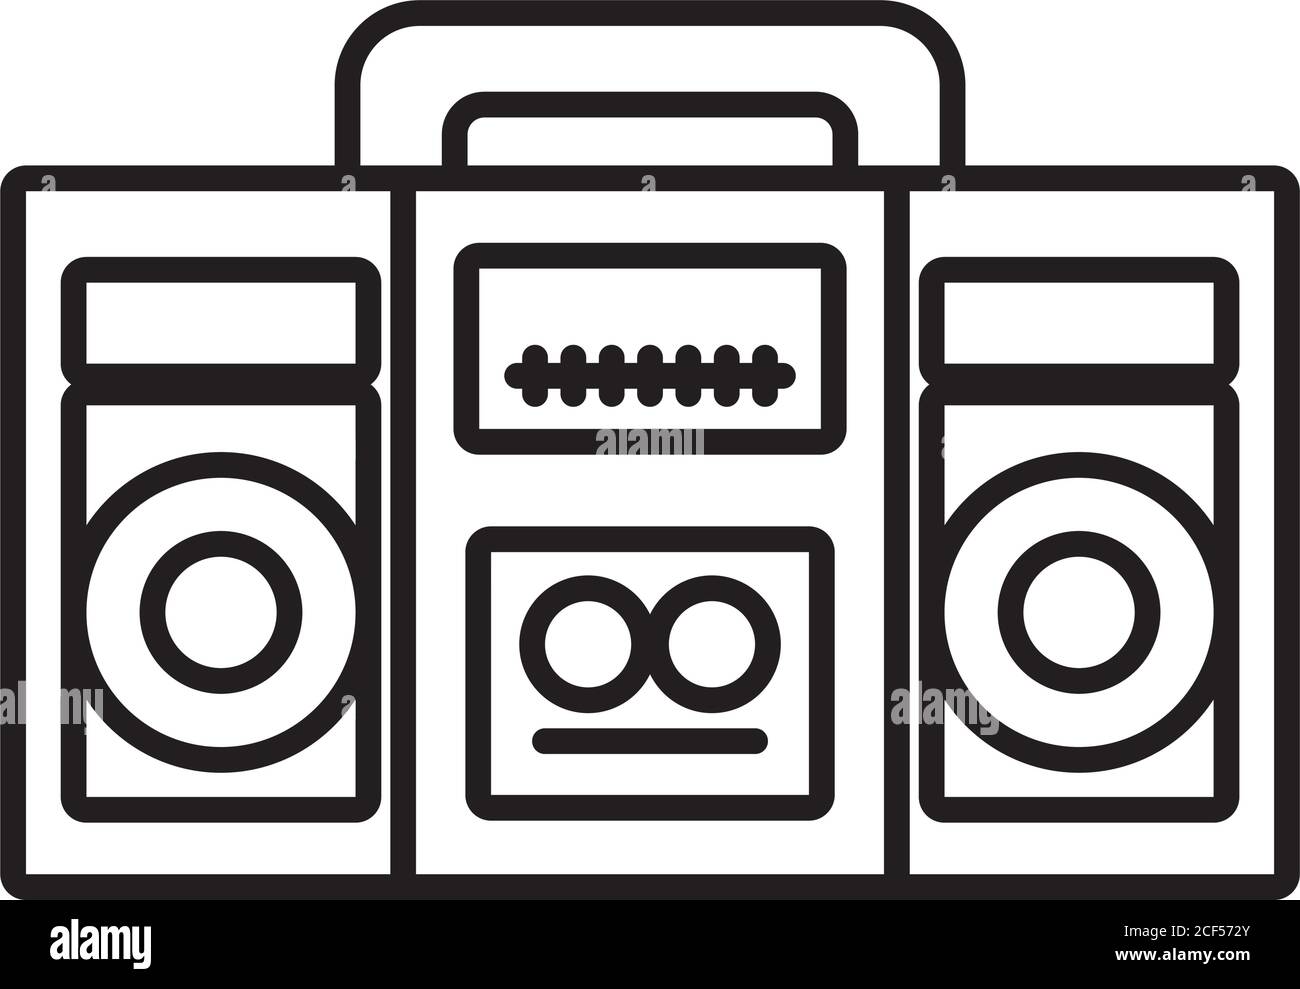 Boombox Drawing High Resolution Stock Photography And Images Alamy We collected here 23 boombox drawing images for you to download, use for free, print or share. https www alamy com pop art elements retro boombox icon over white background line style vector illustration image370752899 html